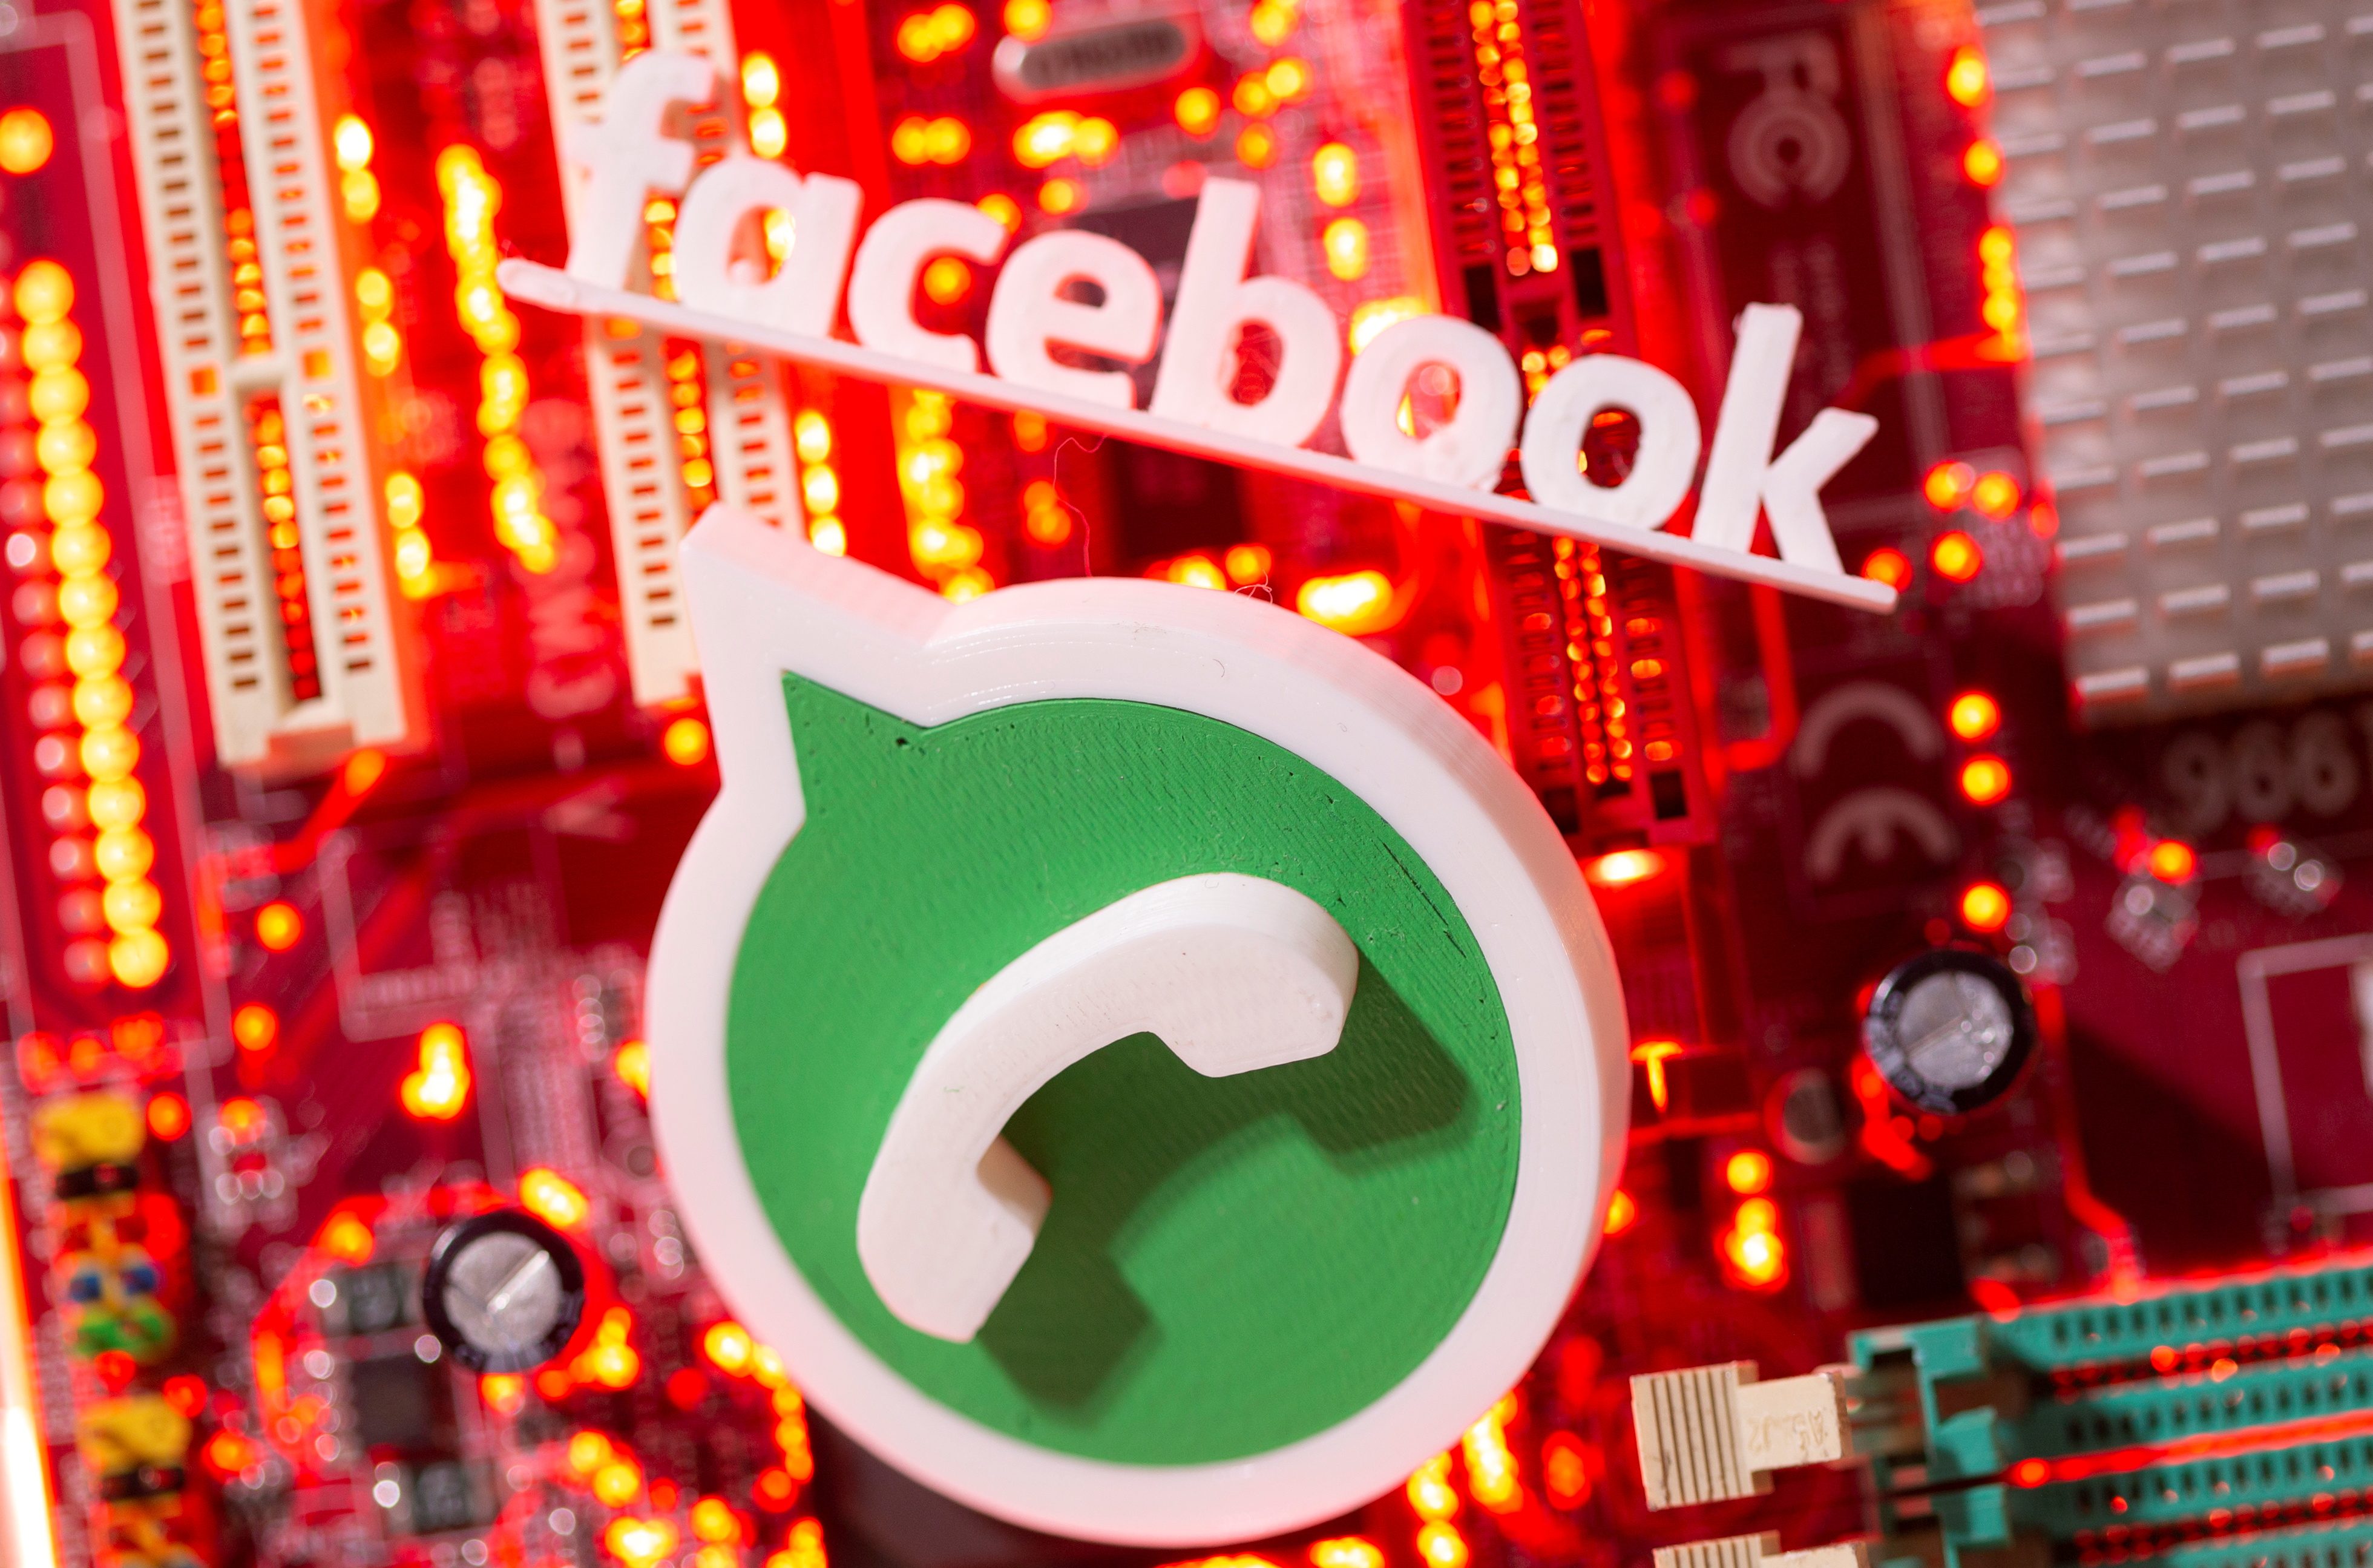 South Africa’s information regulator says WhatsApp cannot share users’ contact information